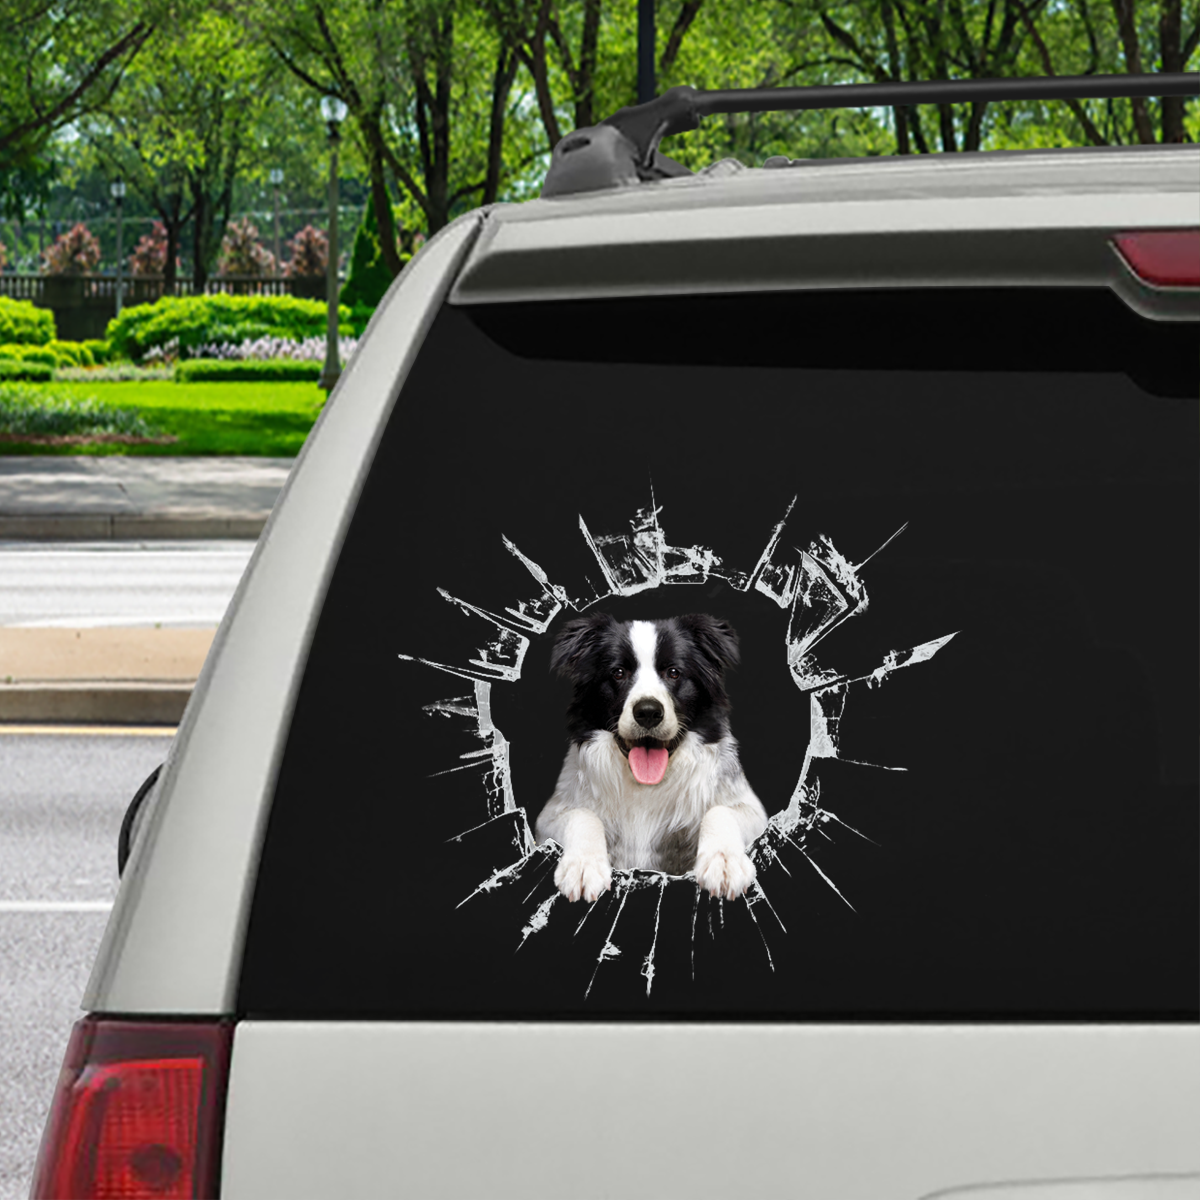 Get In - It's Time For Shopping - Border Collie Car Sticker V1